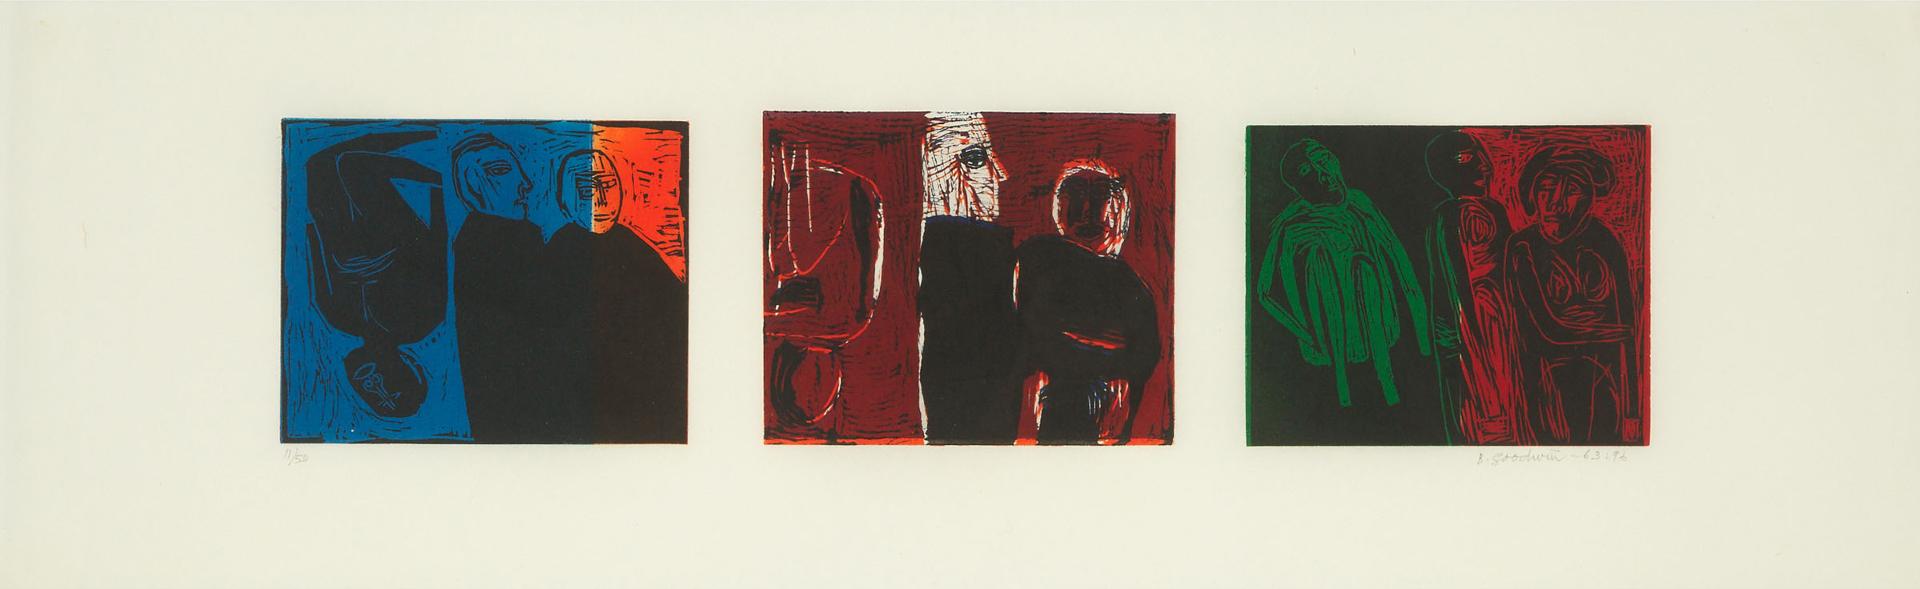 Betty Roodish Goodwin (1923-2008) - 96, 1963, REWORKED 1996 (PRINTED 1998) [ROSEMARIE L. TOVELL, 186]